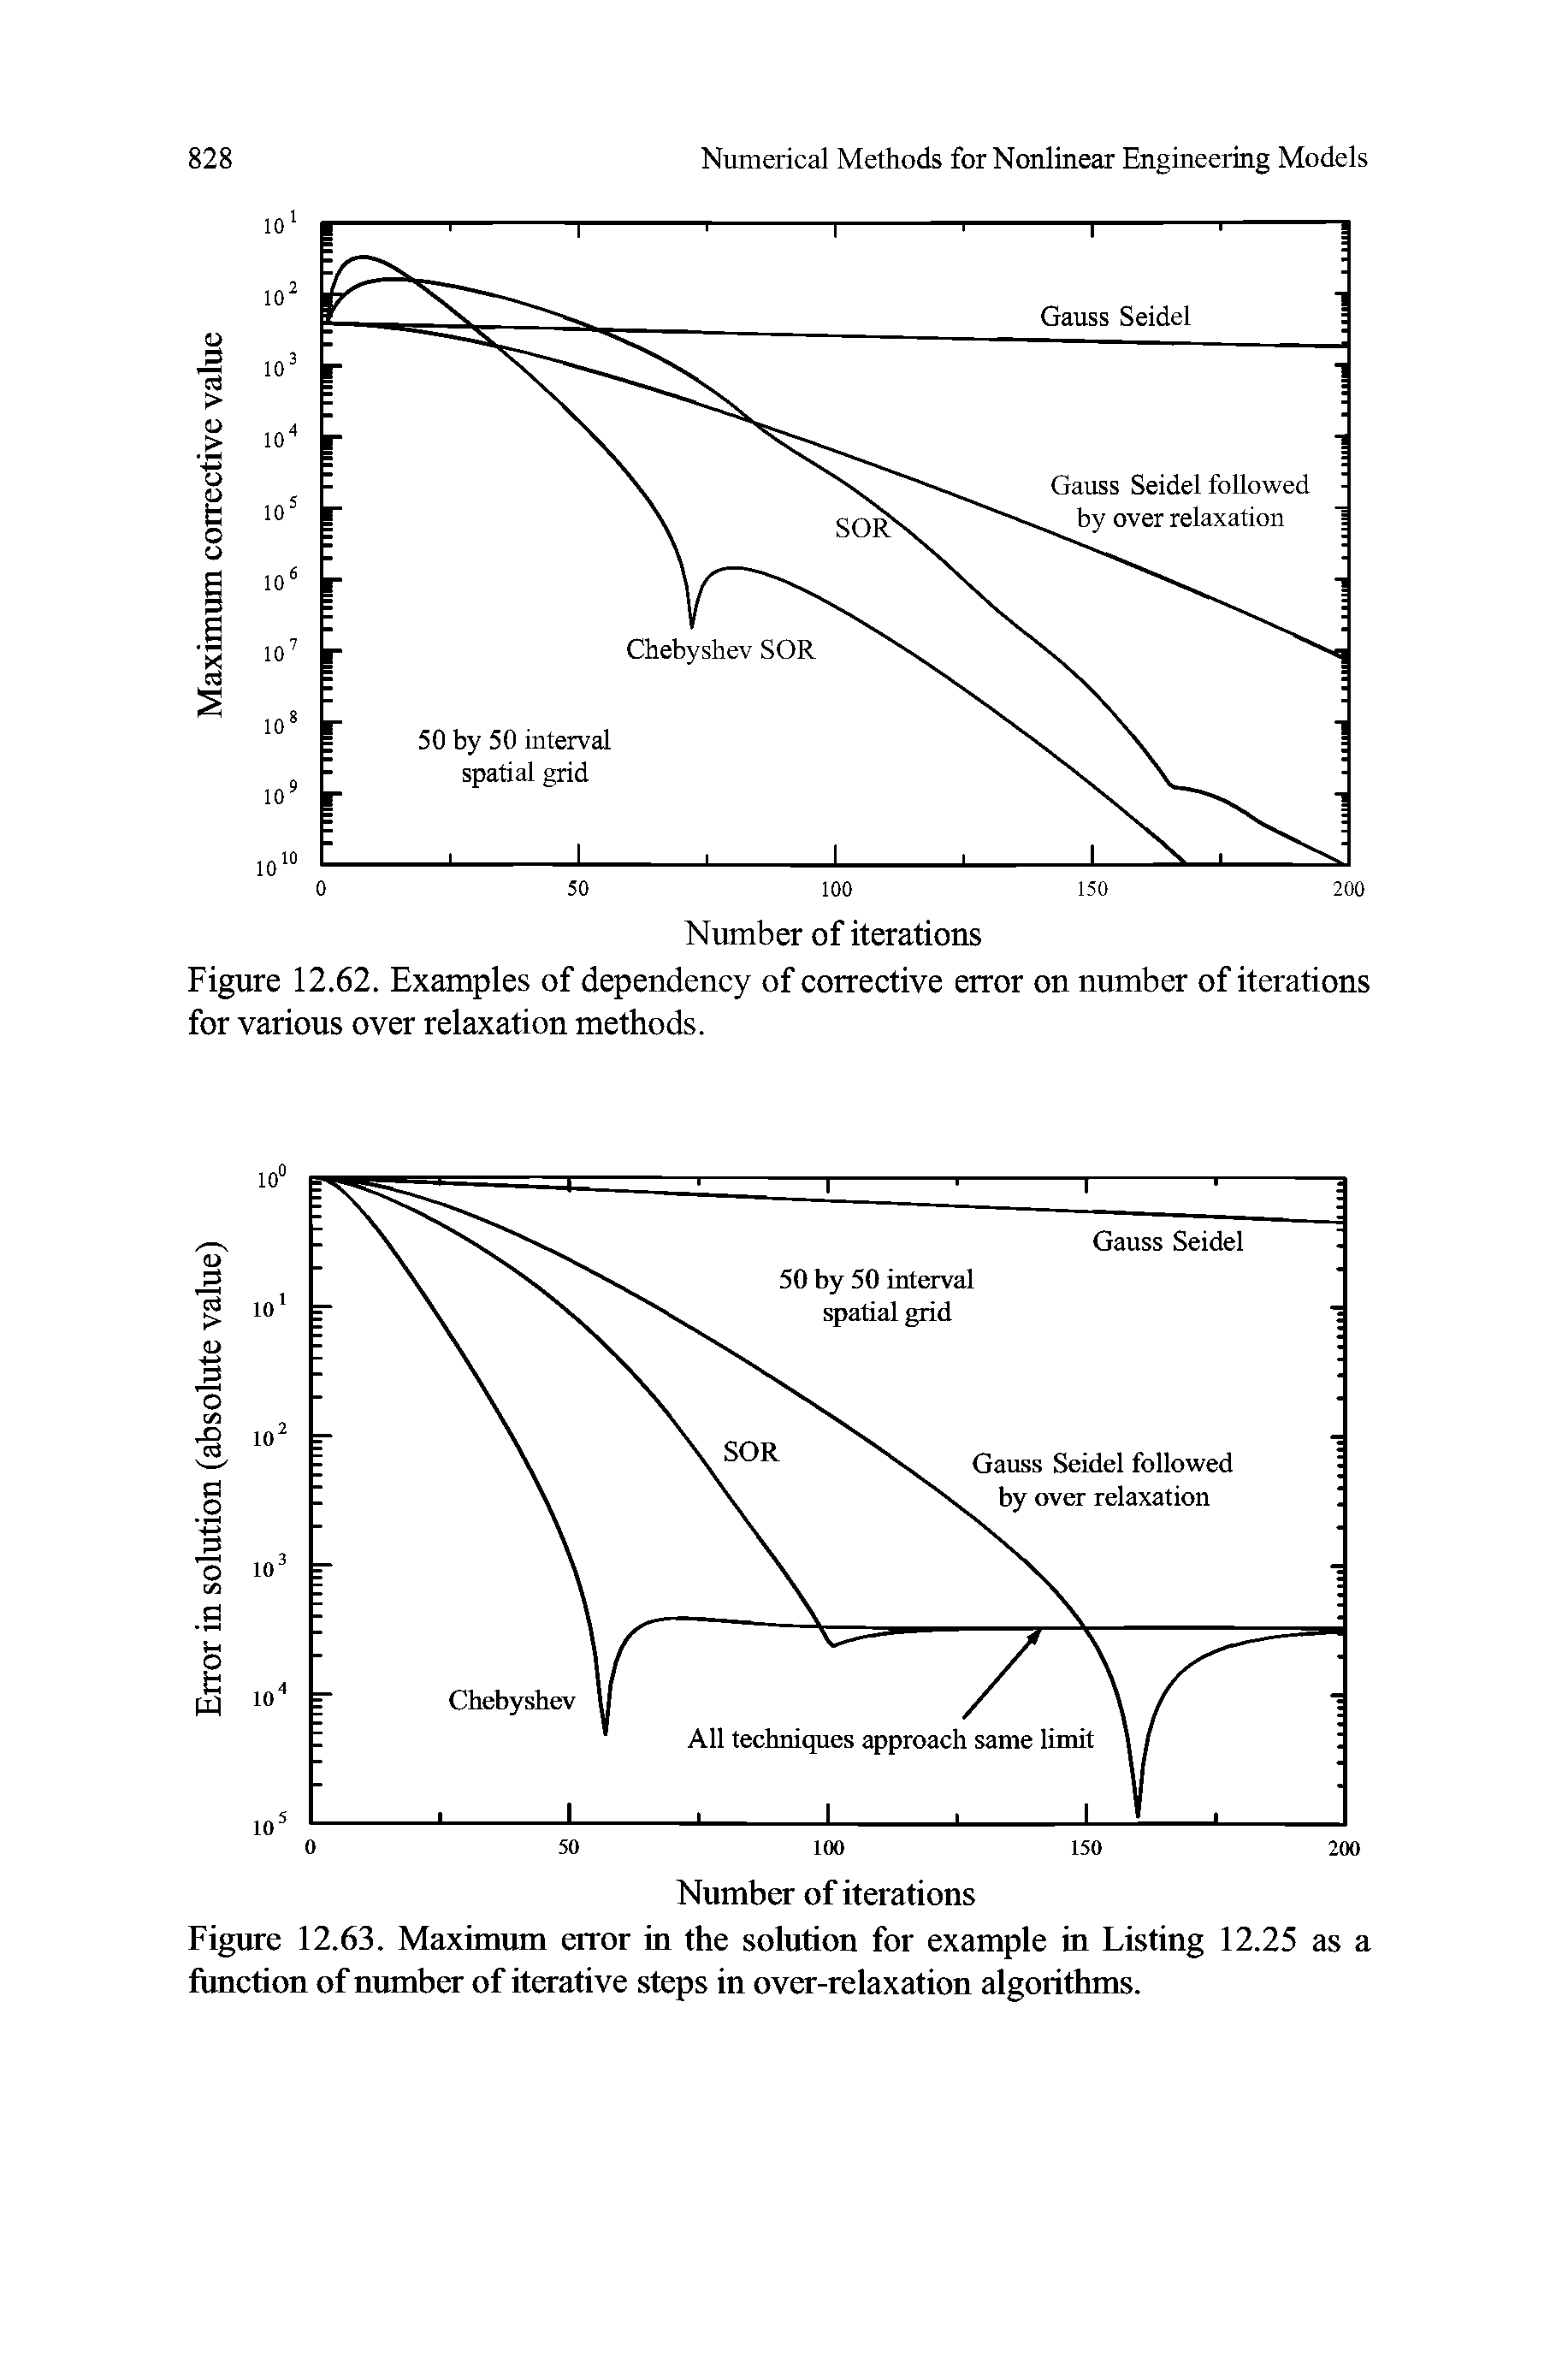 Figure 12.62. Examples of dependency of corrective error on number of iterations for various over relaxation methods.